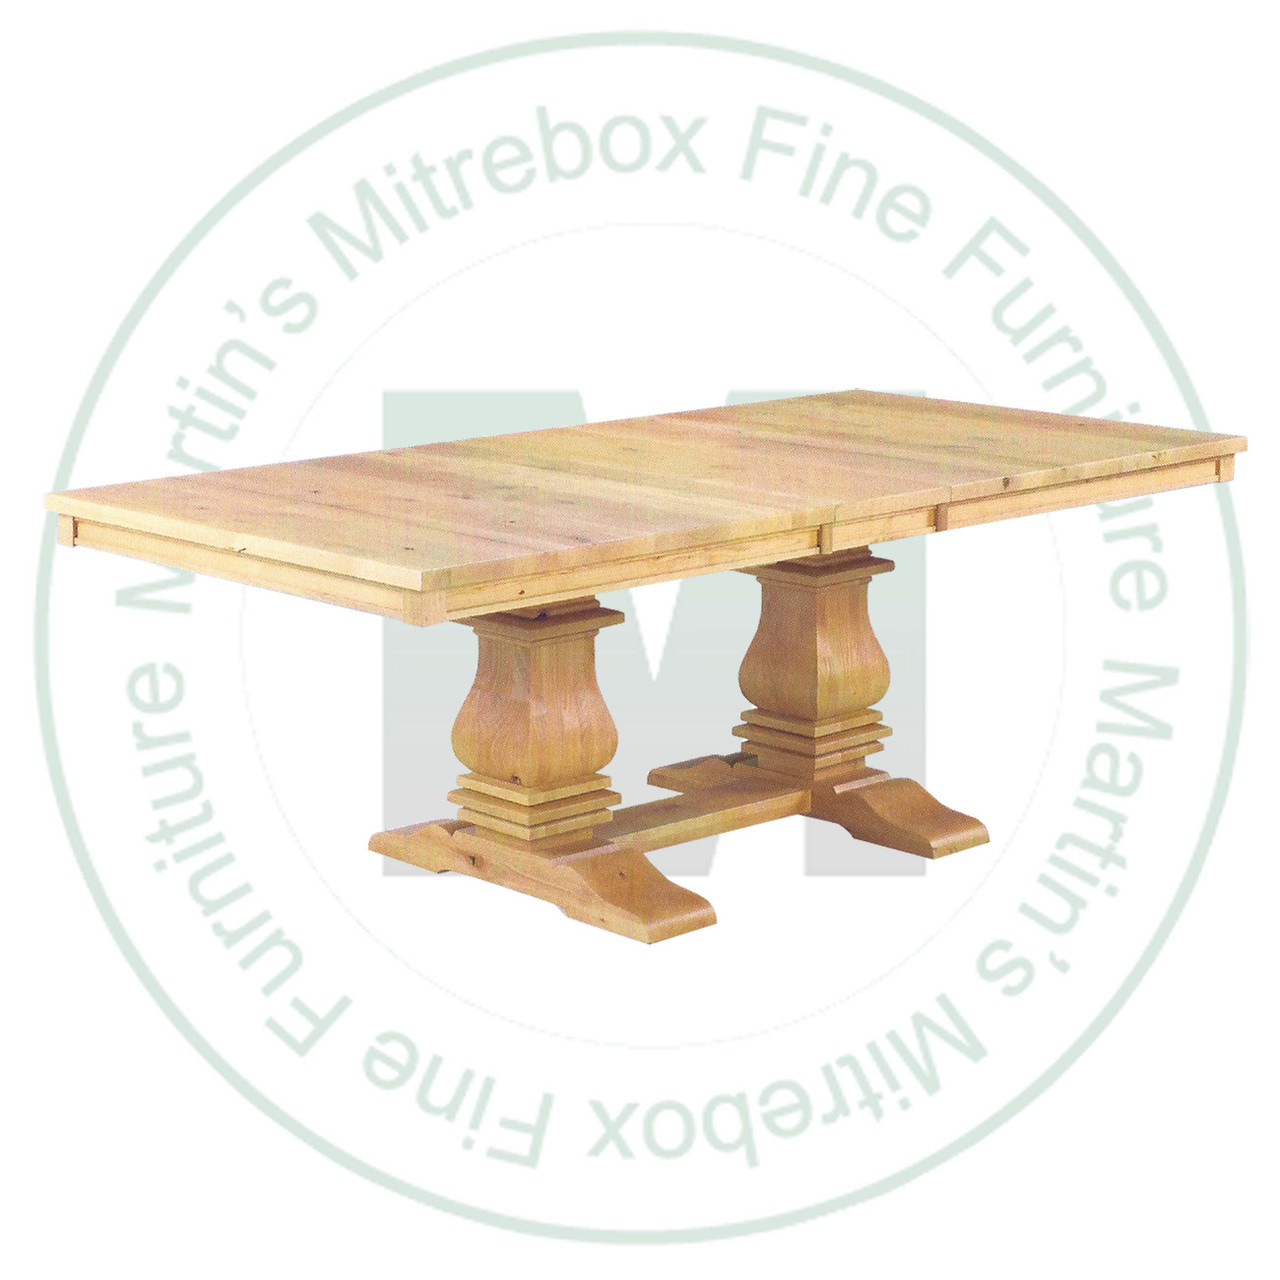 Maple Mediterranean Solid Top Pedestal Table 42''D x 96''W x 30''H. Table Has 1.25'' Thick Top